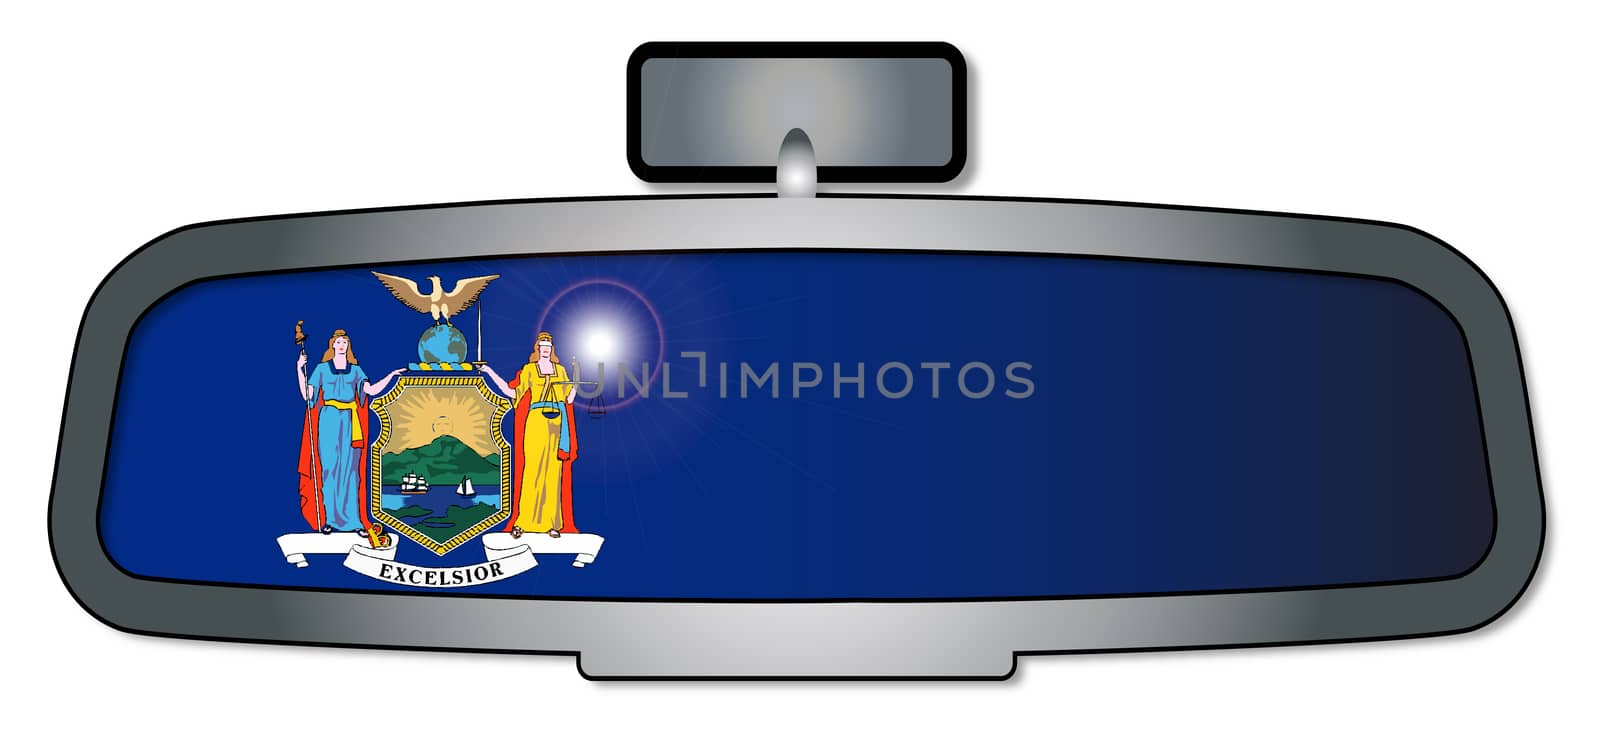 A vehicle rear view mirror with the flag of the state of New York